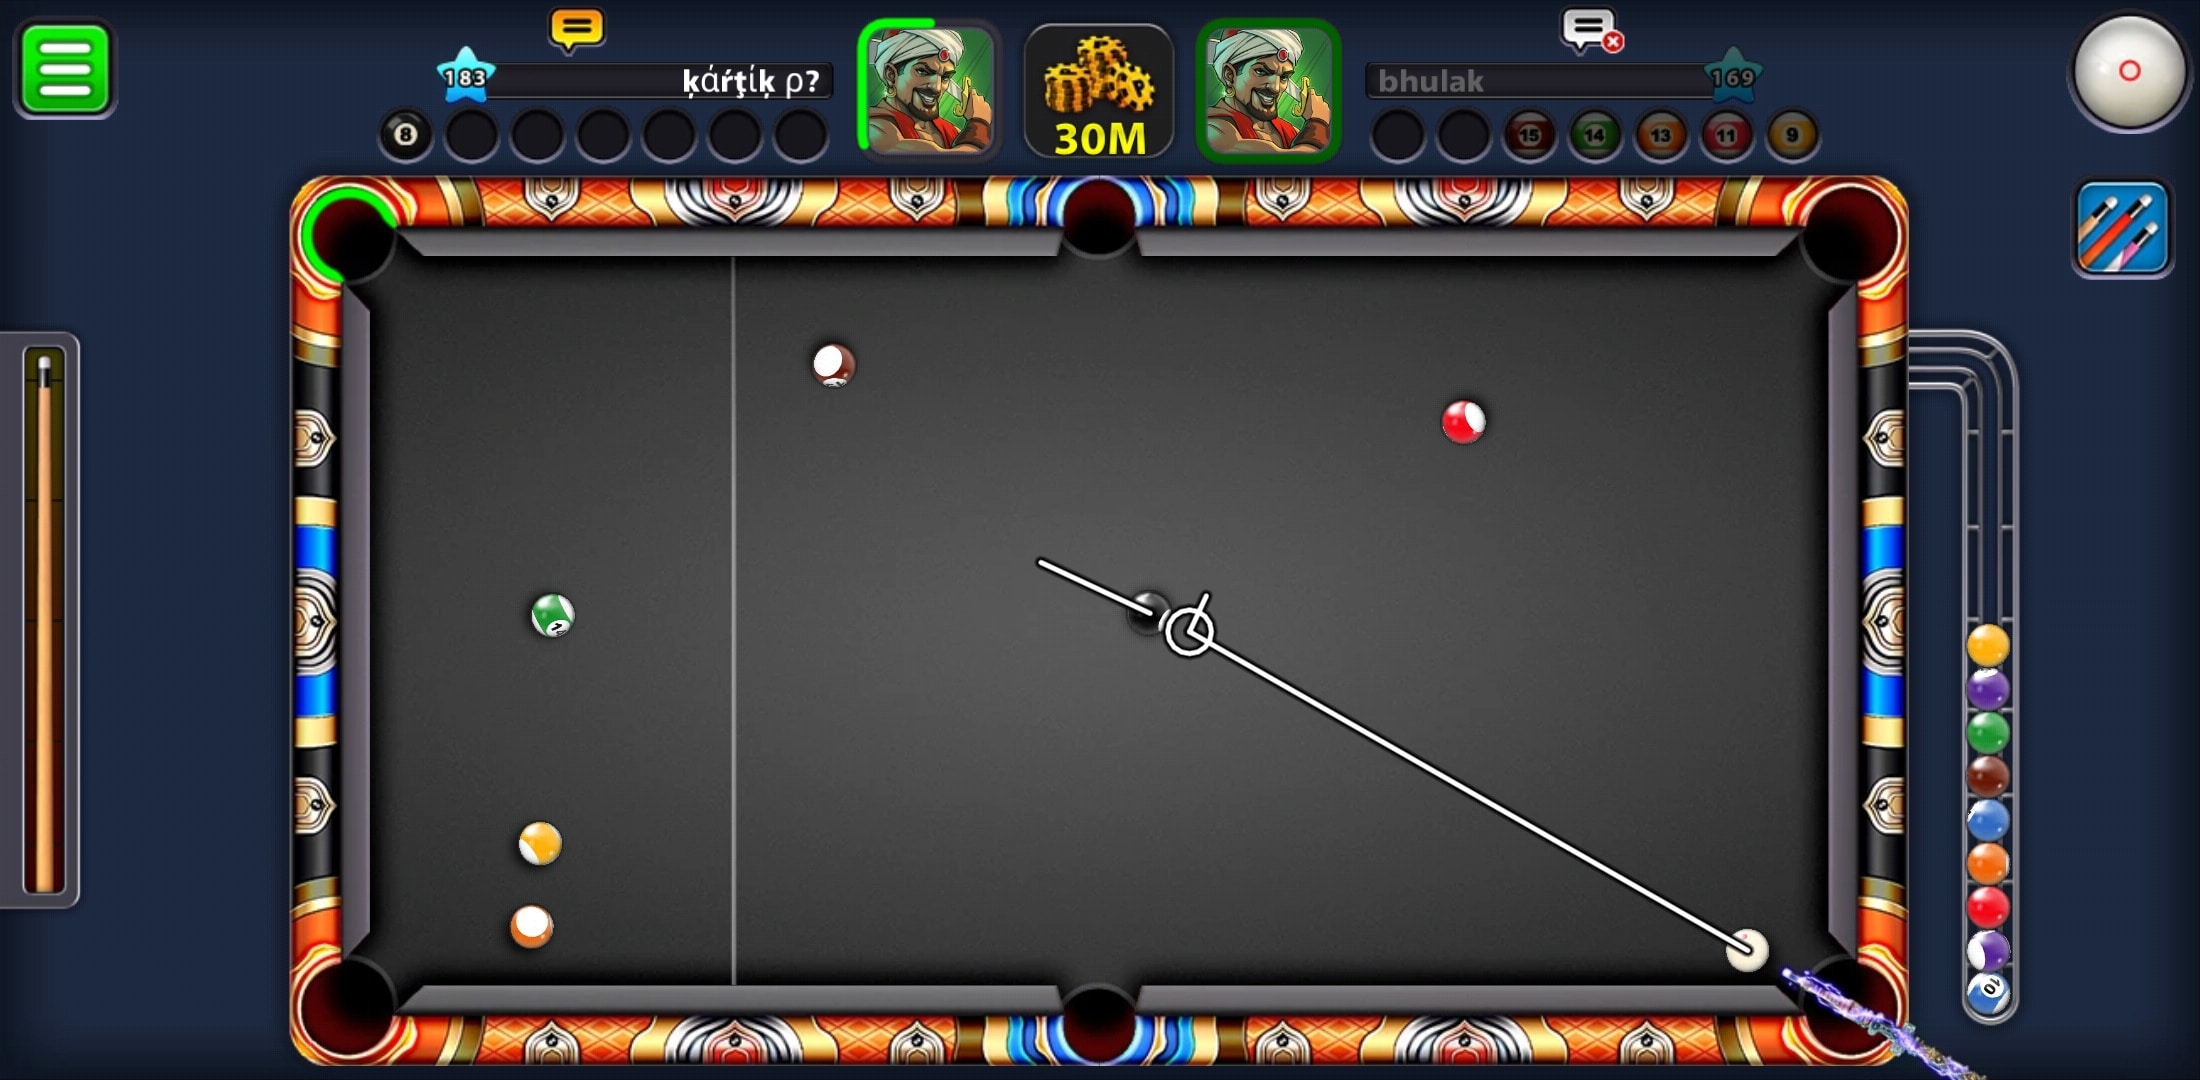 Buy 8 Ball Pool Coins - Unlimited 8 ball pool coins ... - 